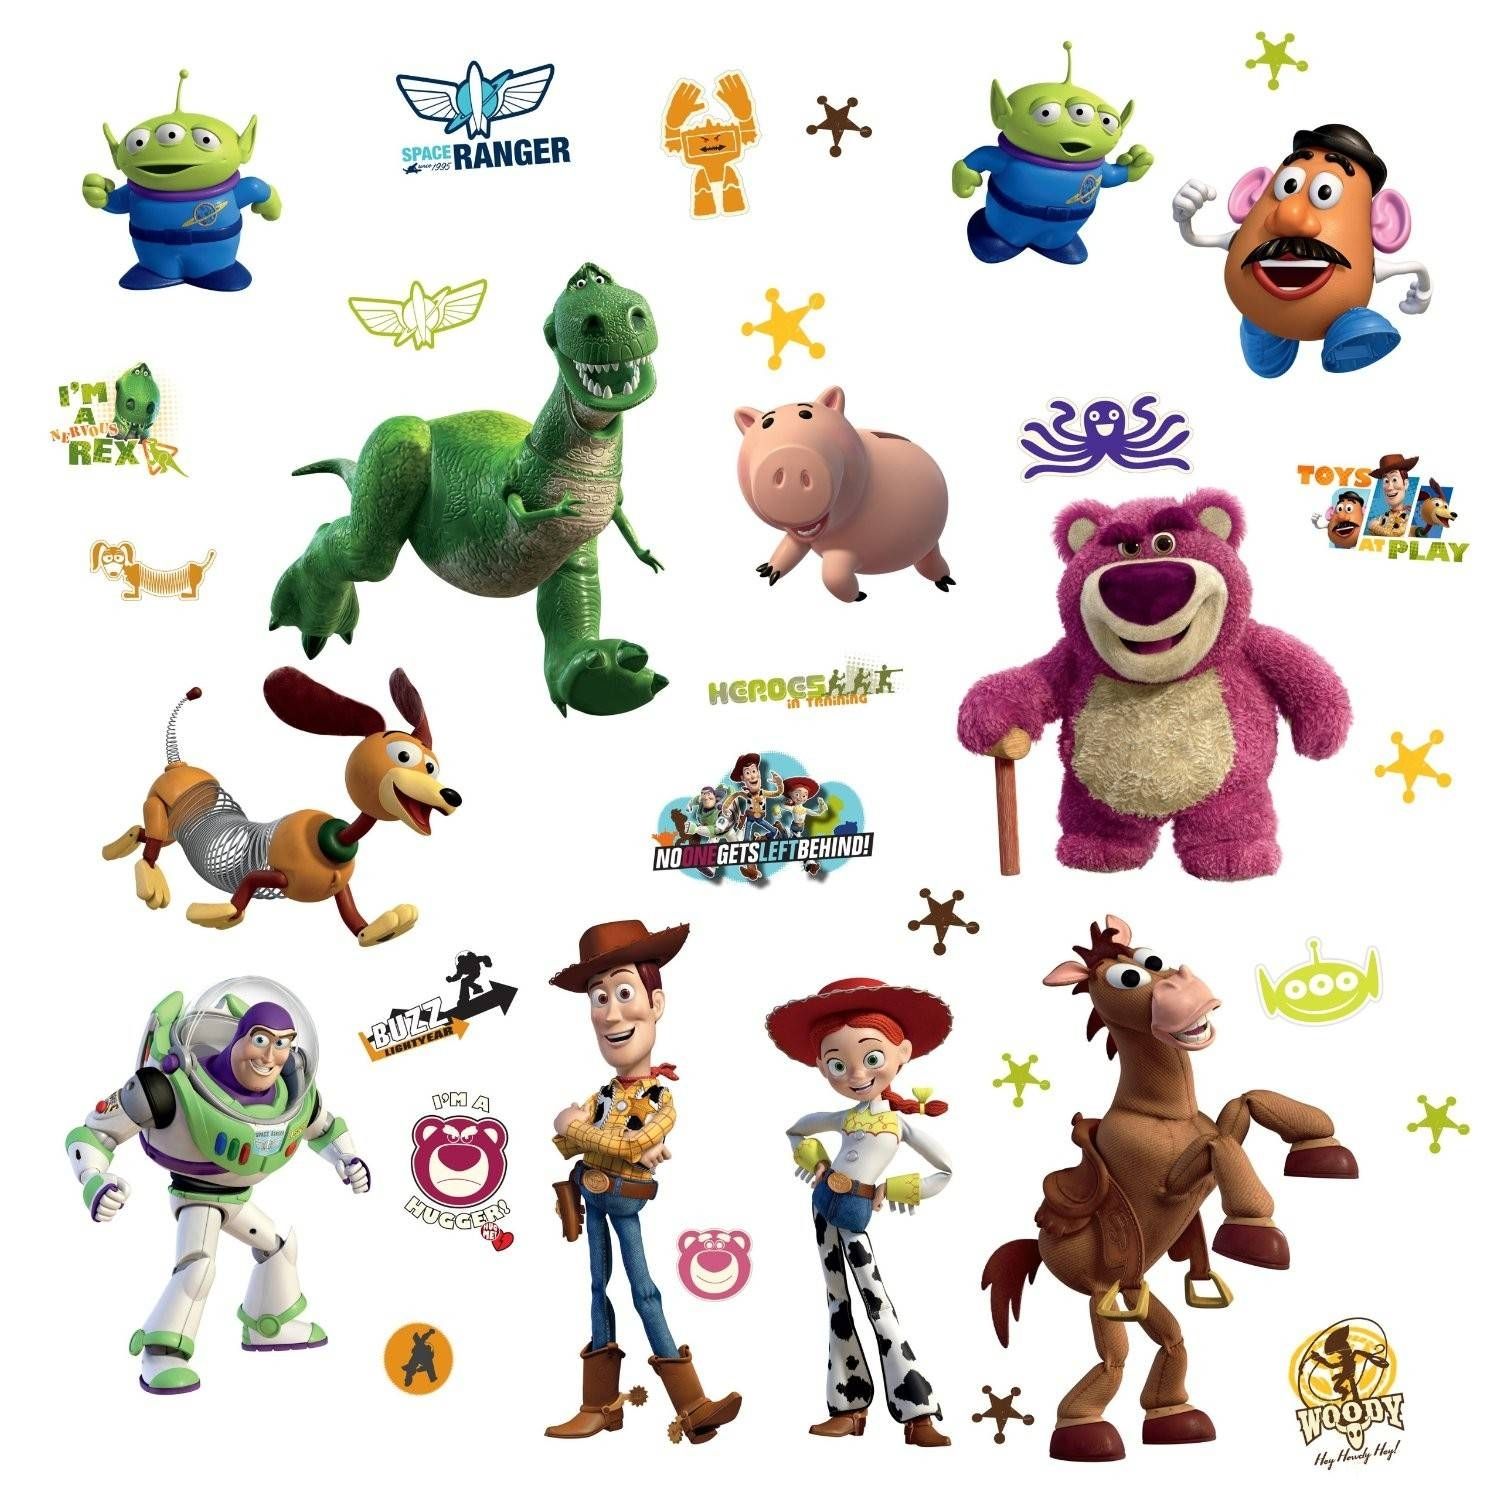 Toy Story 3 Glow In The Dark Wall Decals Regarding Most Popular Toy Story Wall Stickers (Gallery 20 of 25)